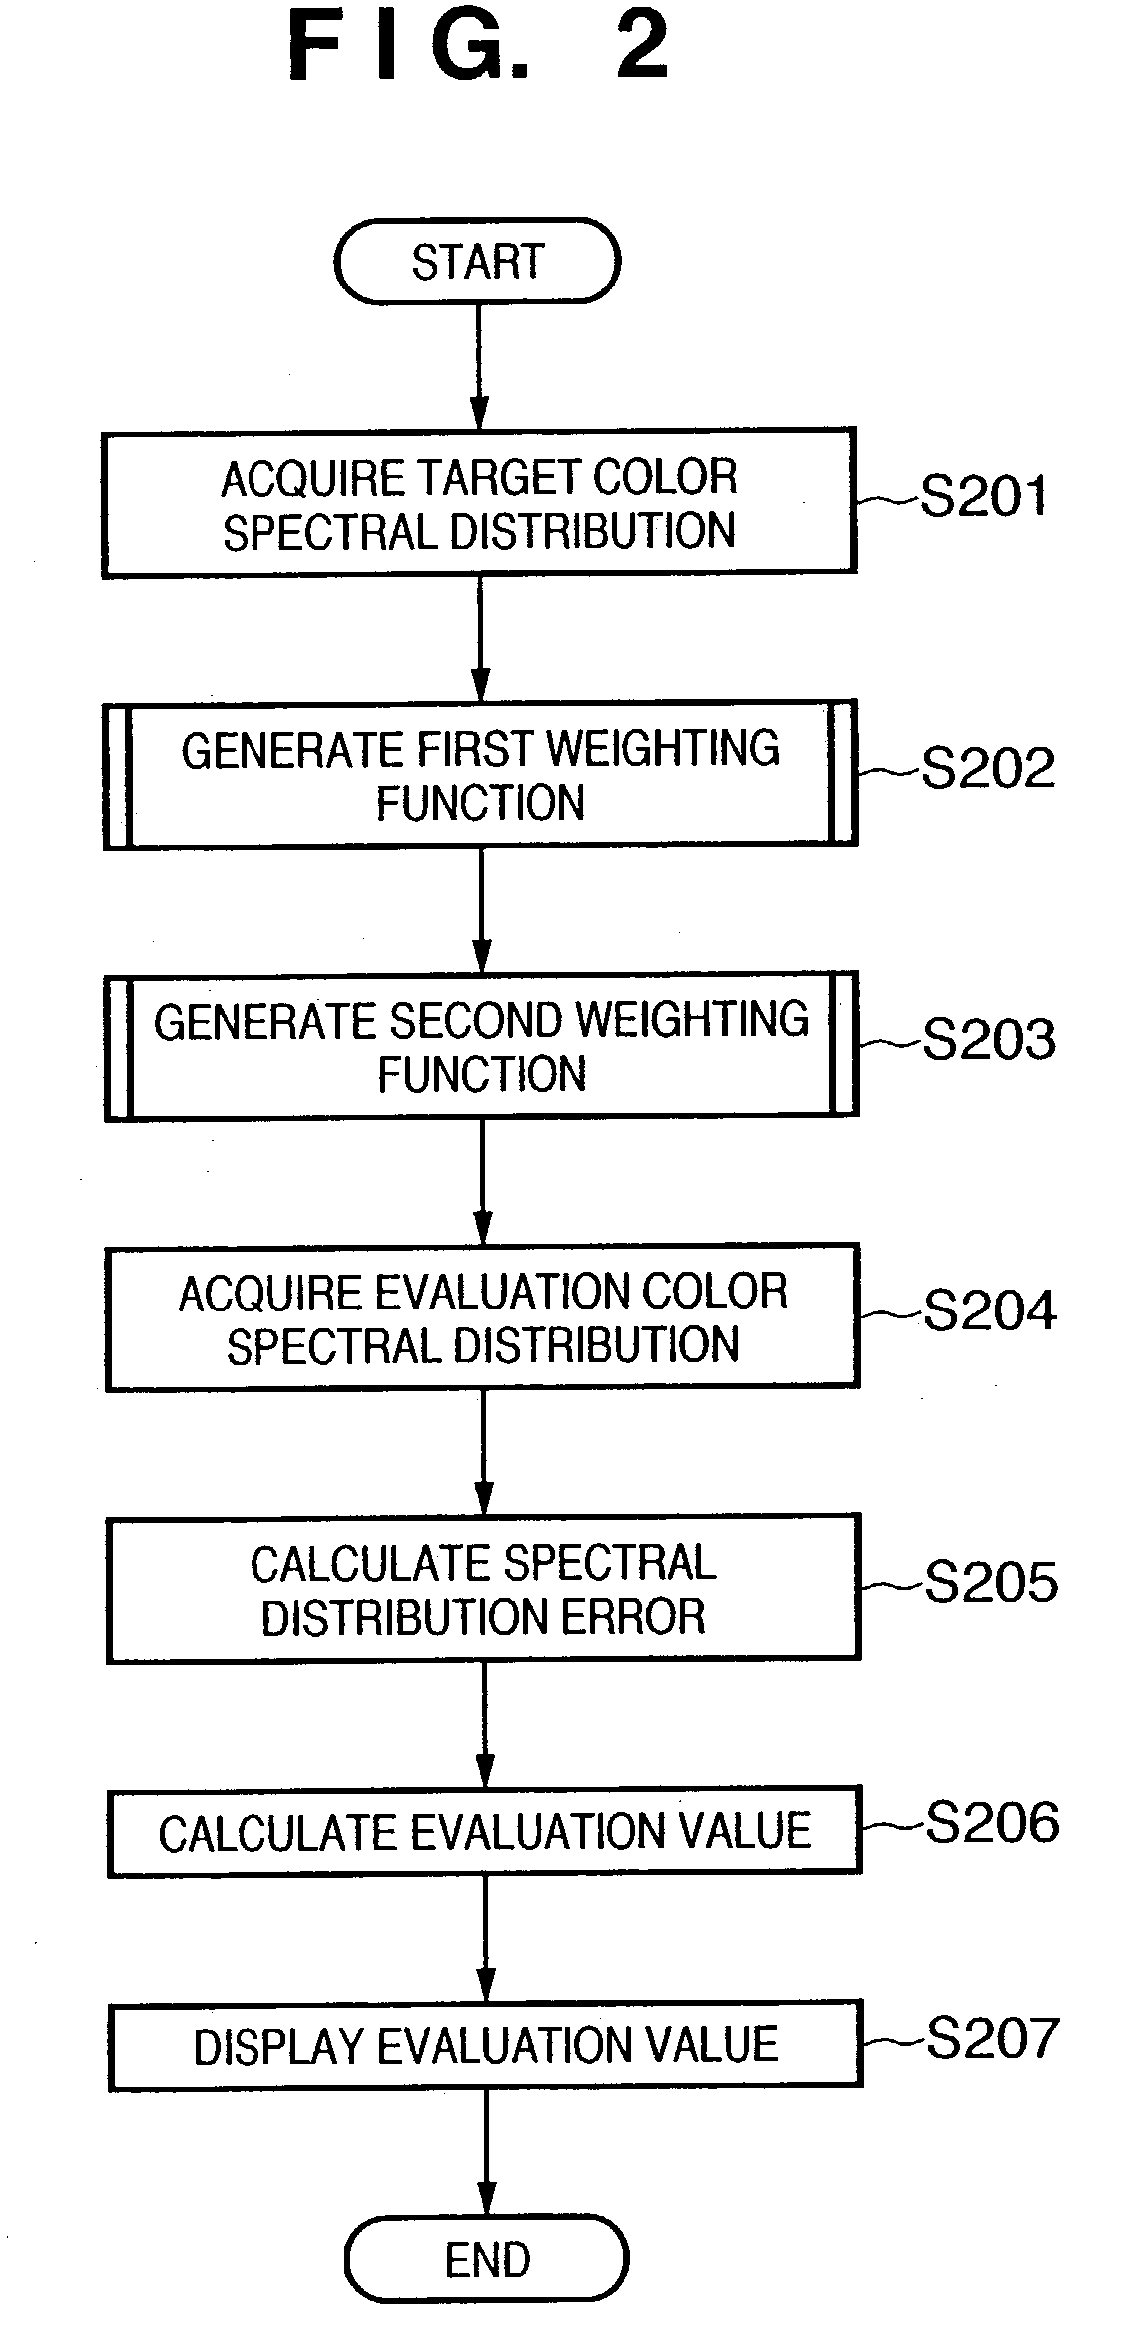 Color evaluation apparatus and method